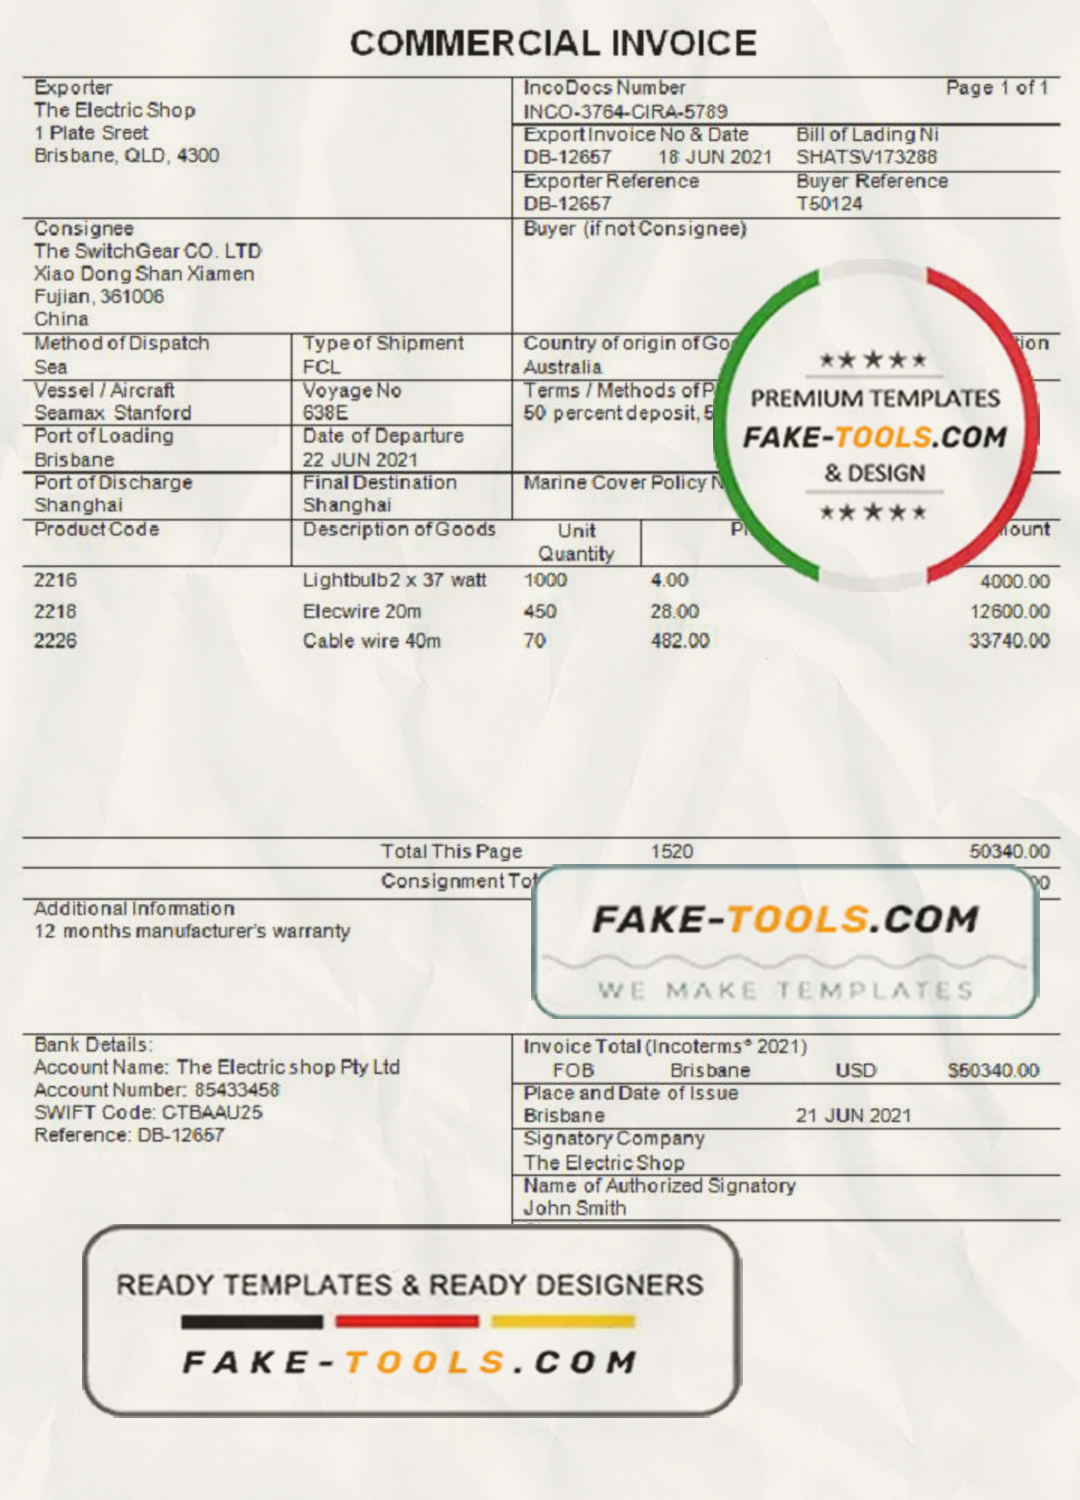 Australia Commercial Invoice company invoice template in Word and PDF format, fully editable scan effect